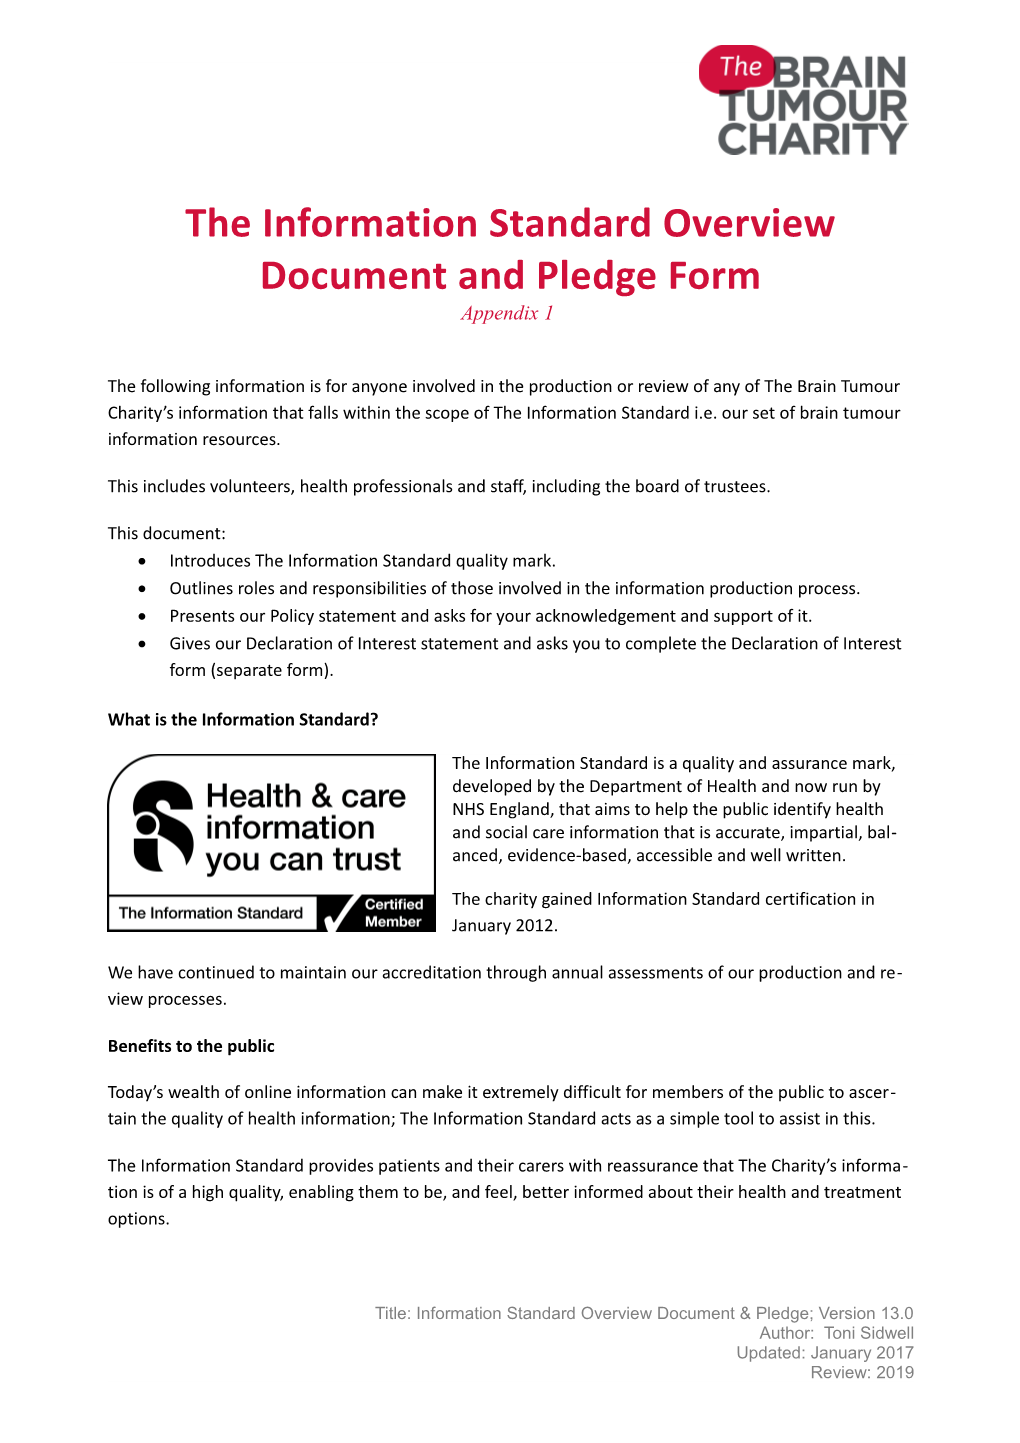 The Information Standard Overview Document and Pledge Form